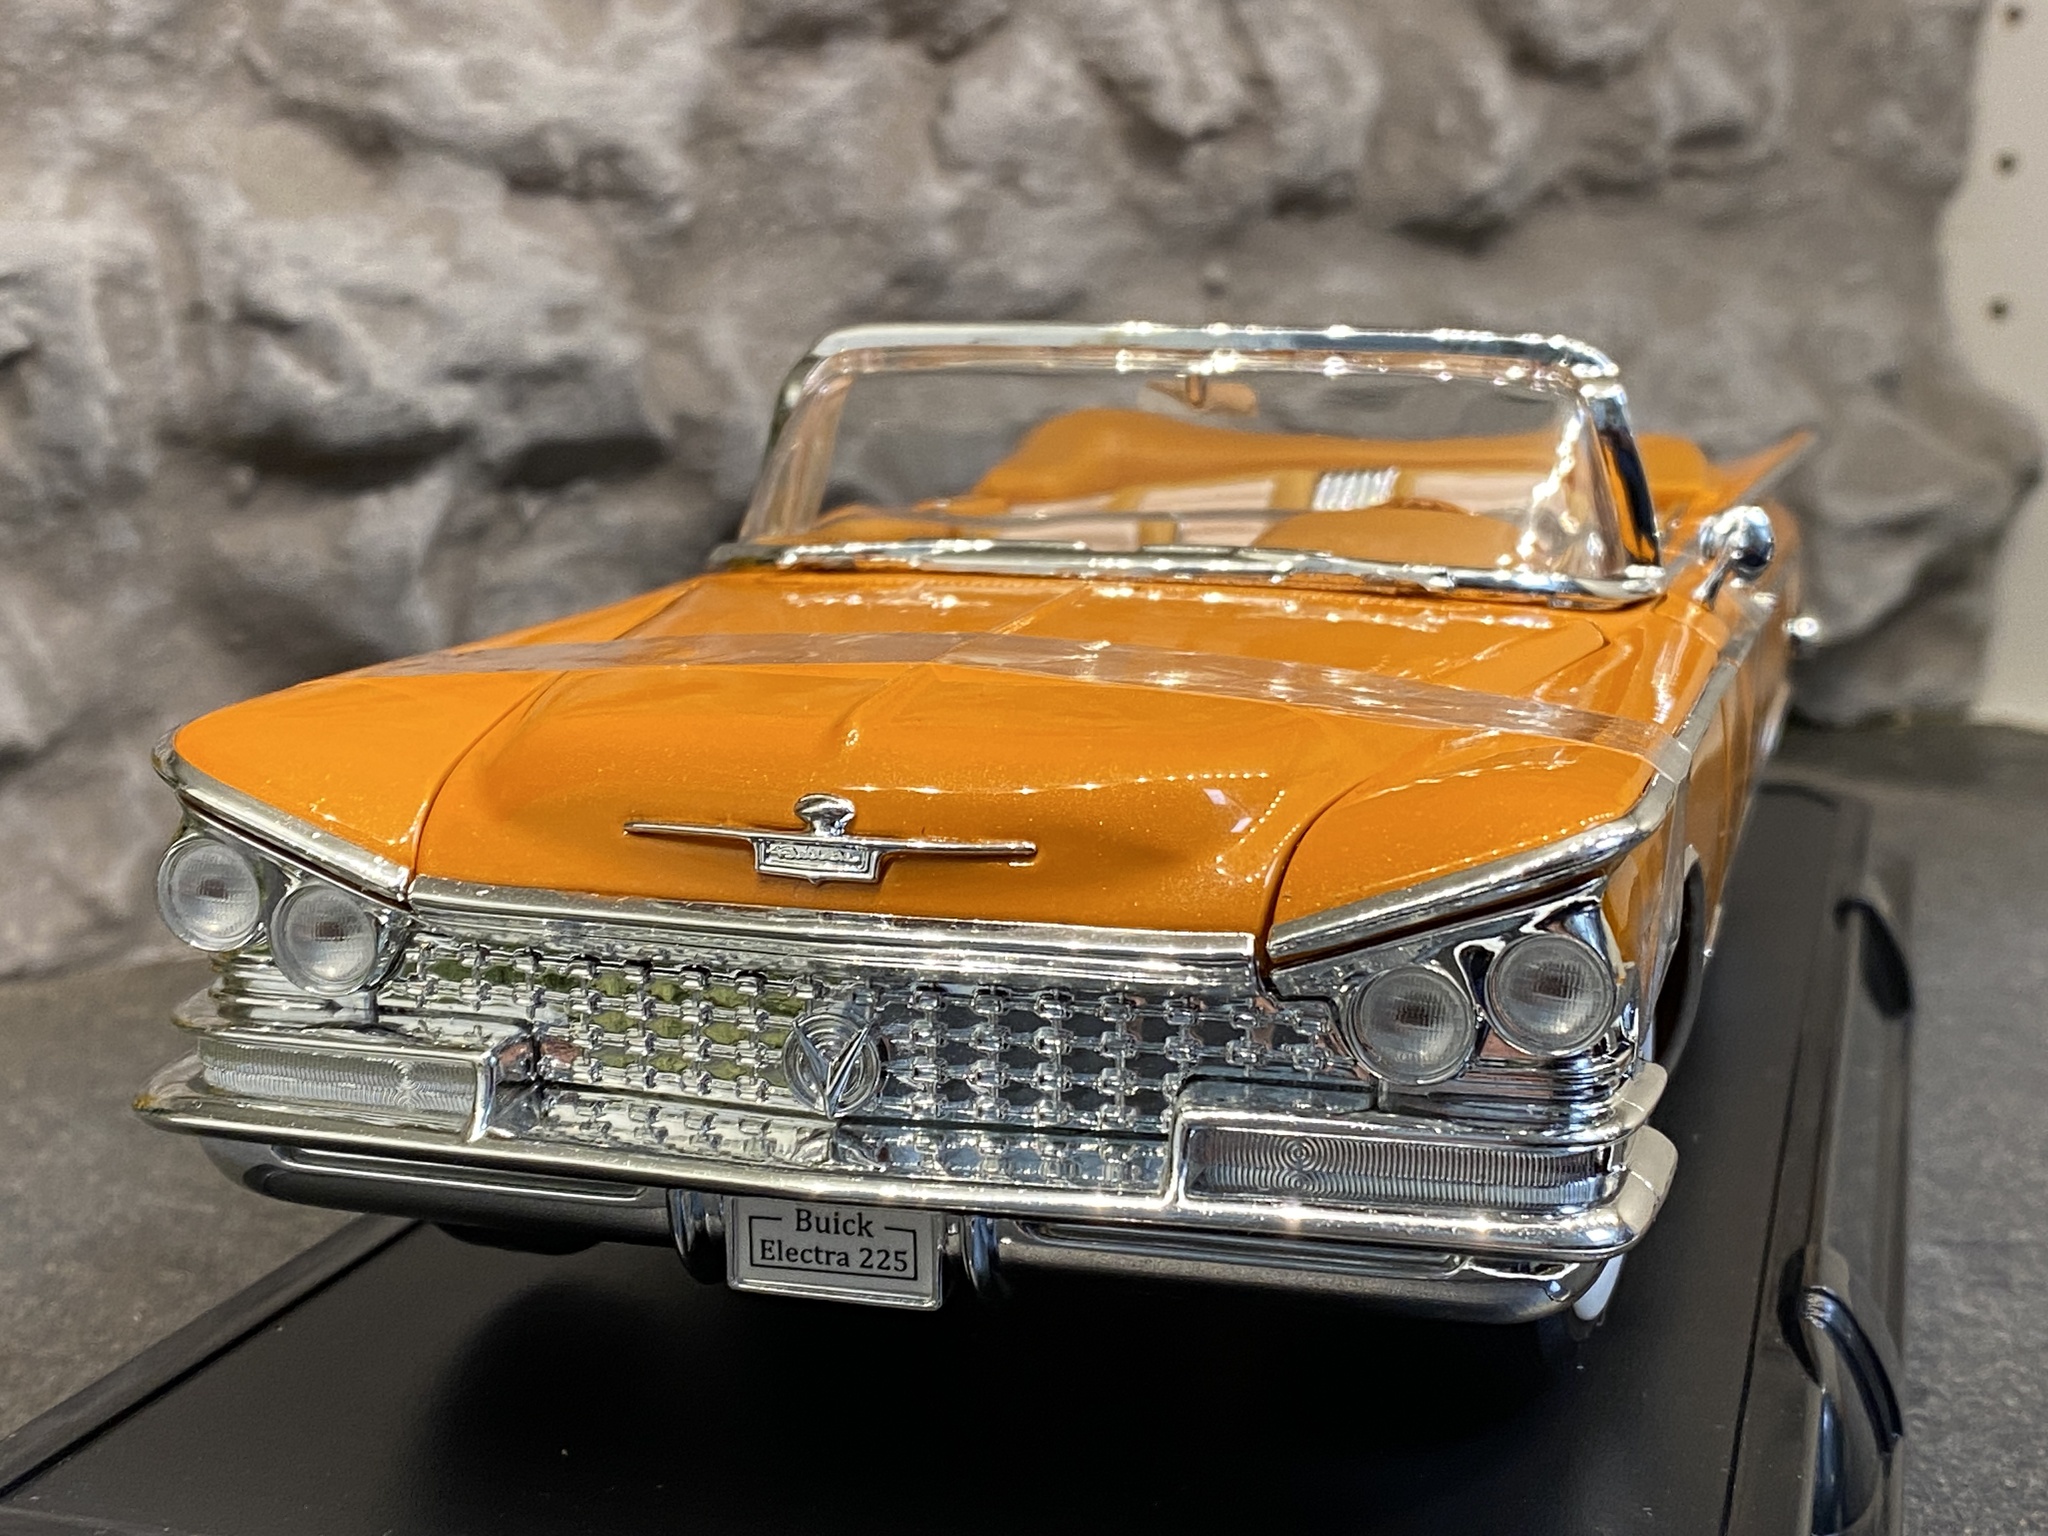 Skala 1/18 Buick Electra 225 59' Orange fr Lucky Diecast "Road Signature Collection"